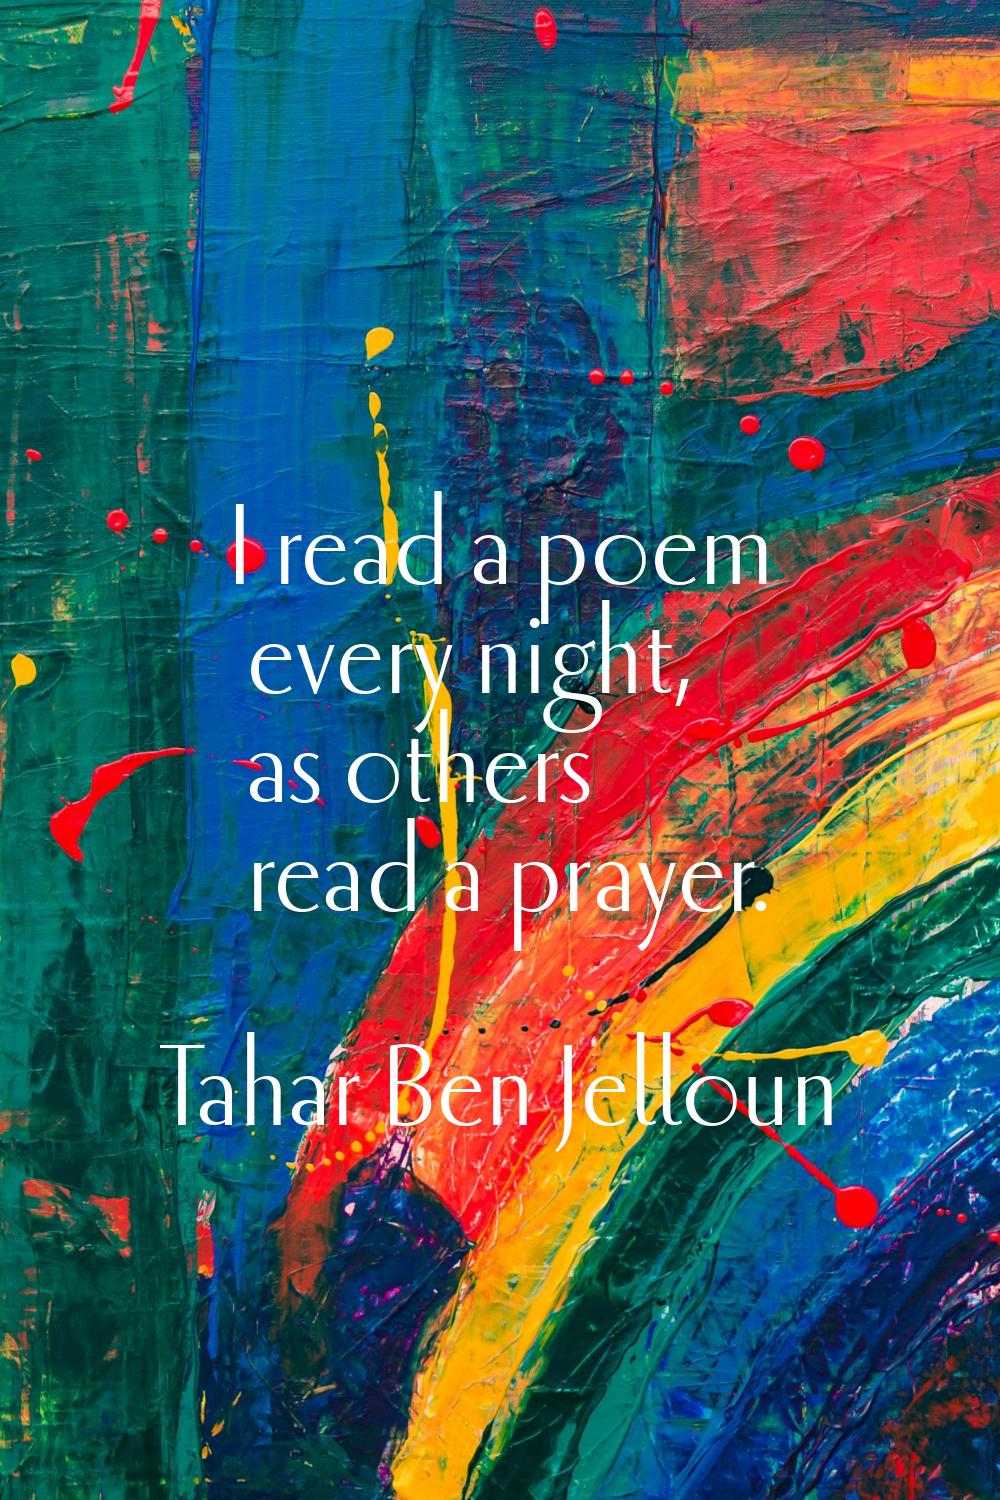 I read a poem every night, as others read a prayer.